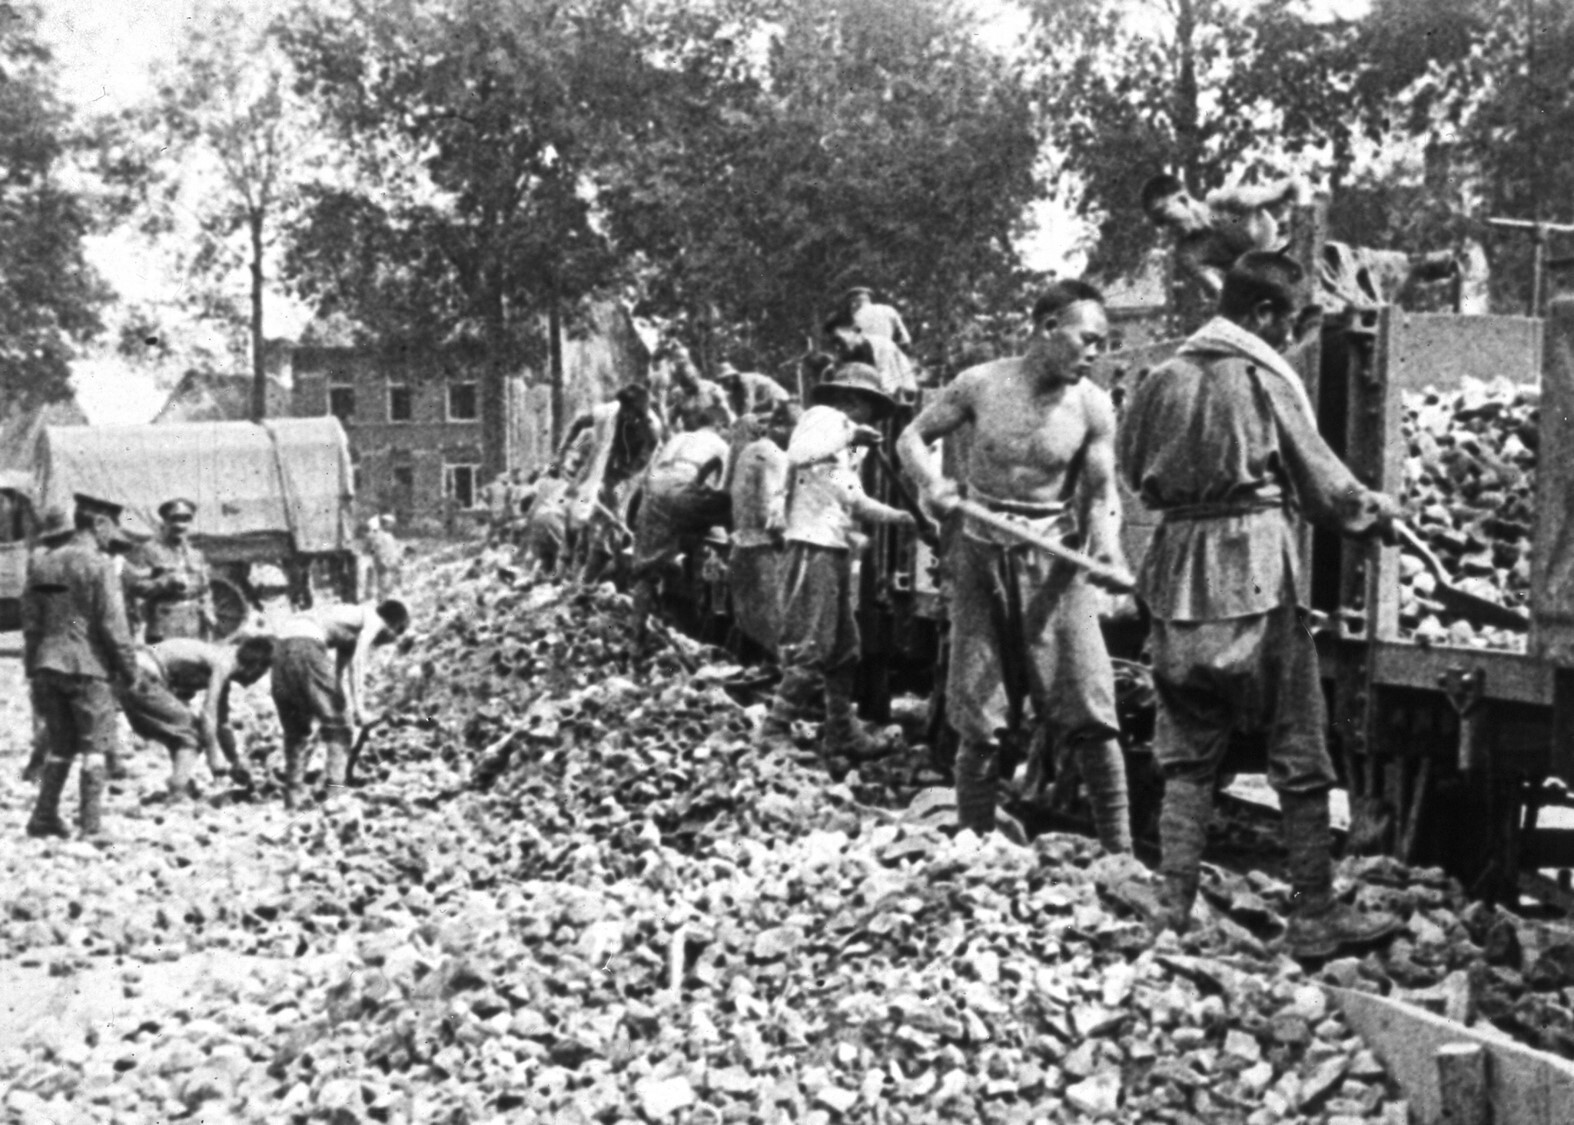 Men of the Chinese Labour Corps unload a train near the Western Front.